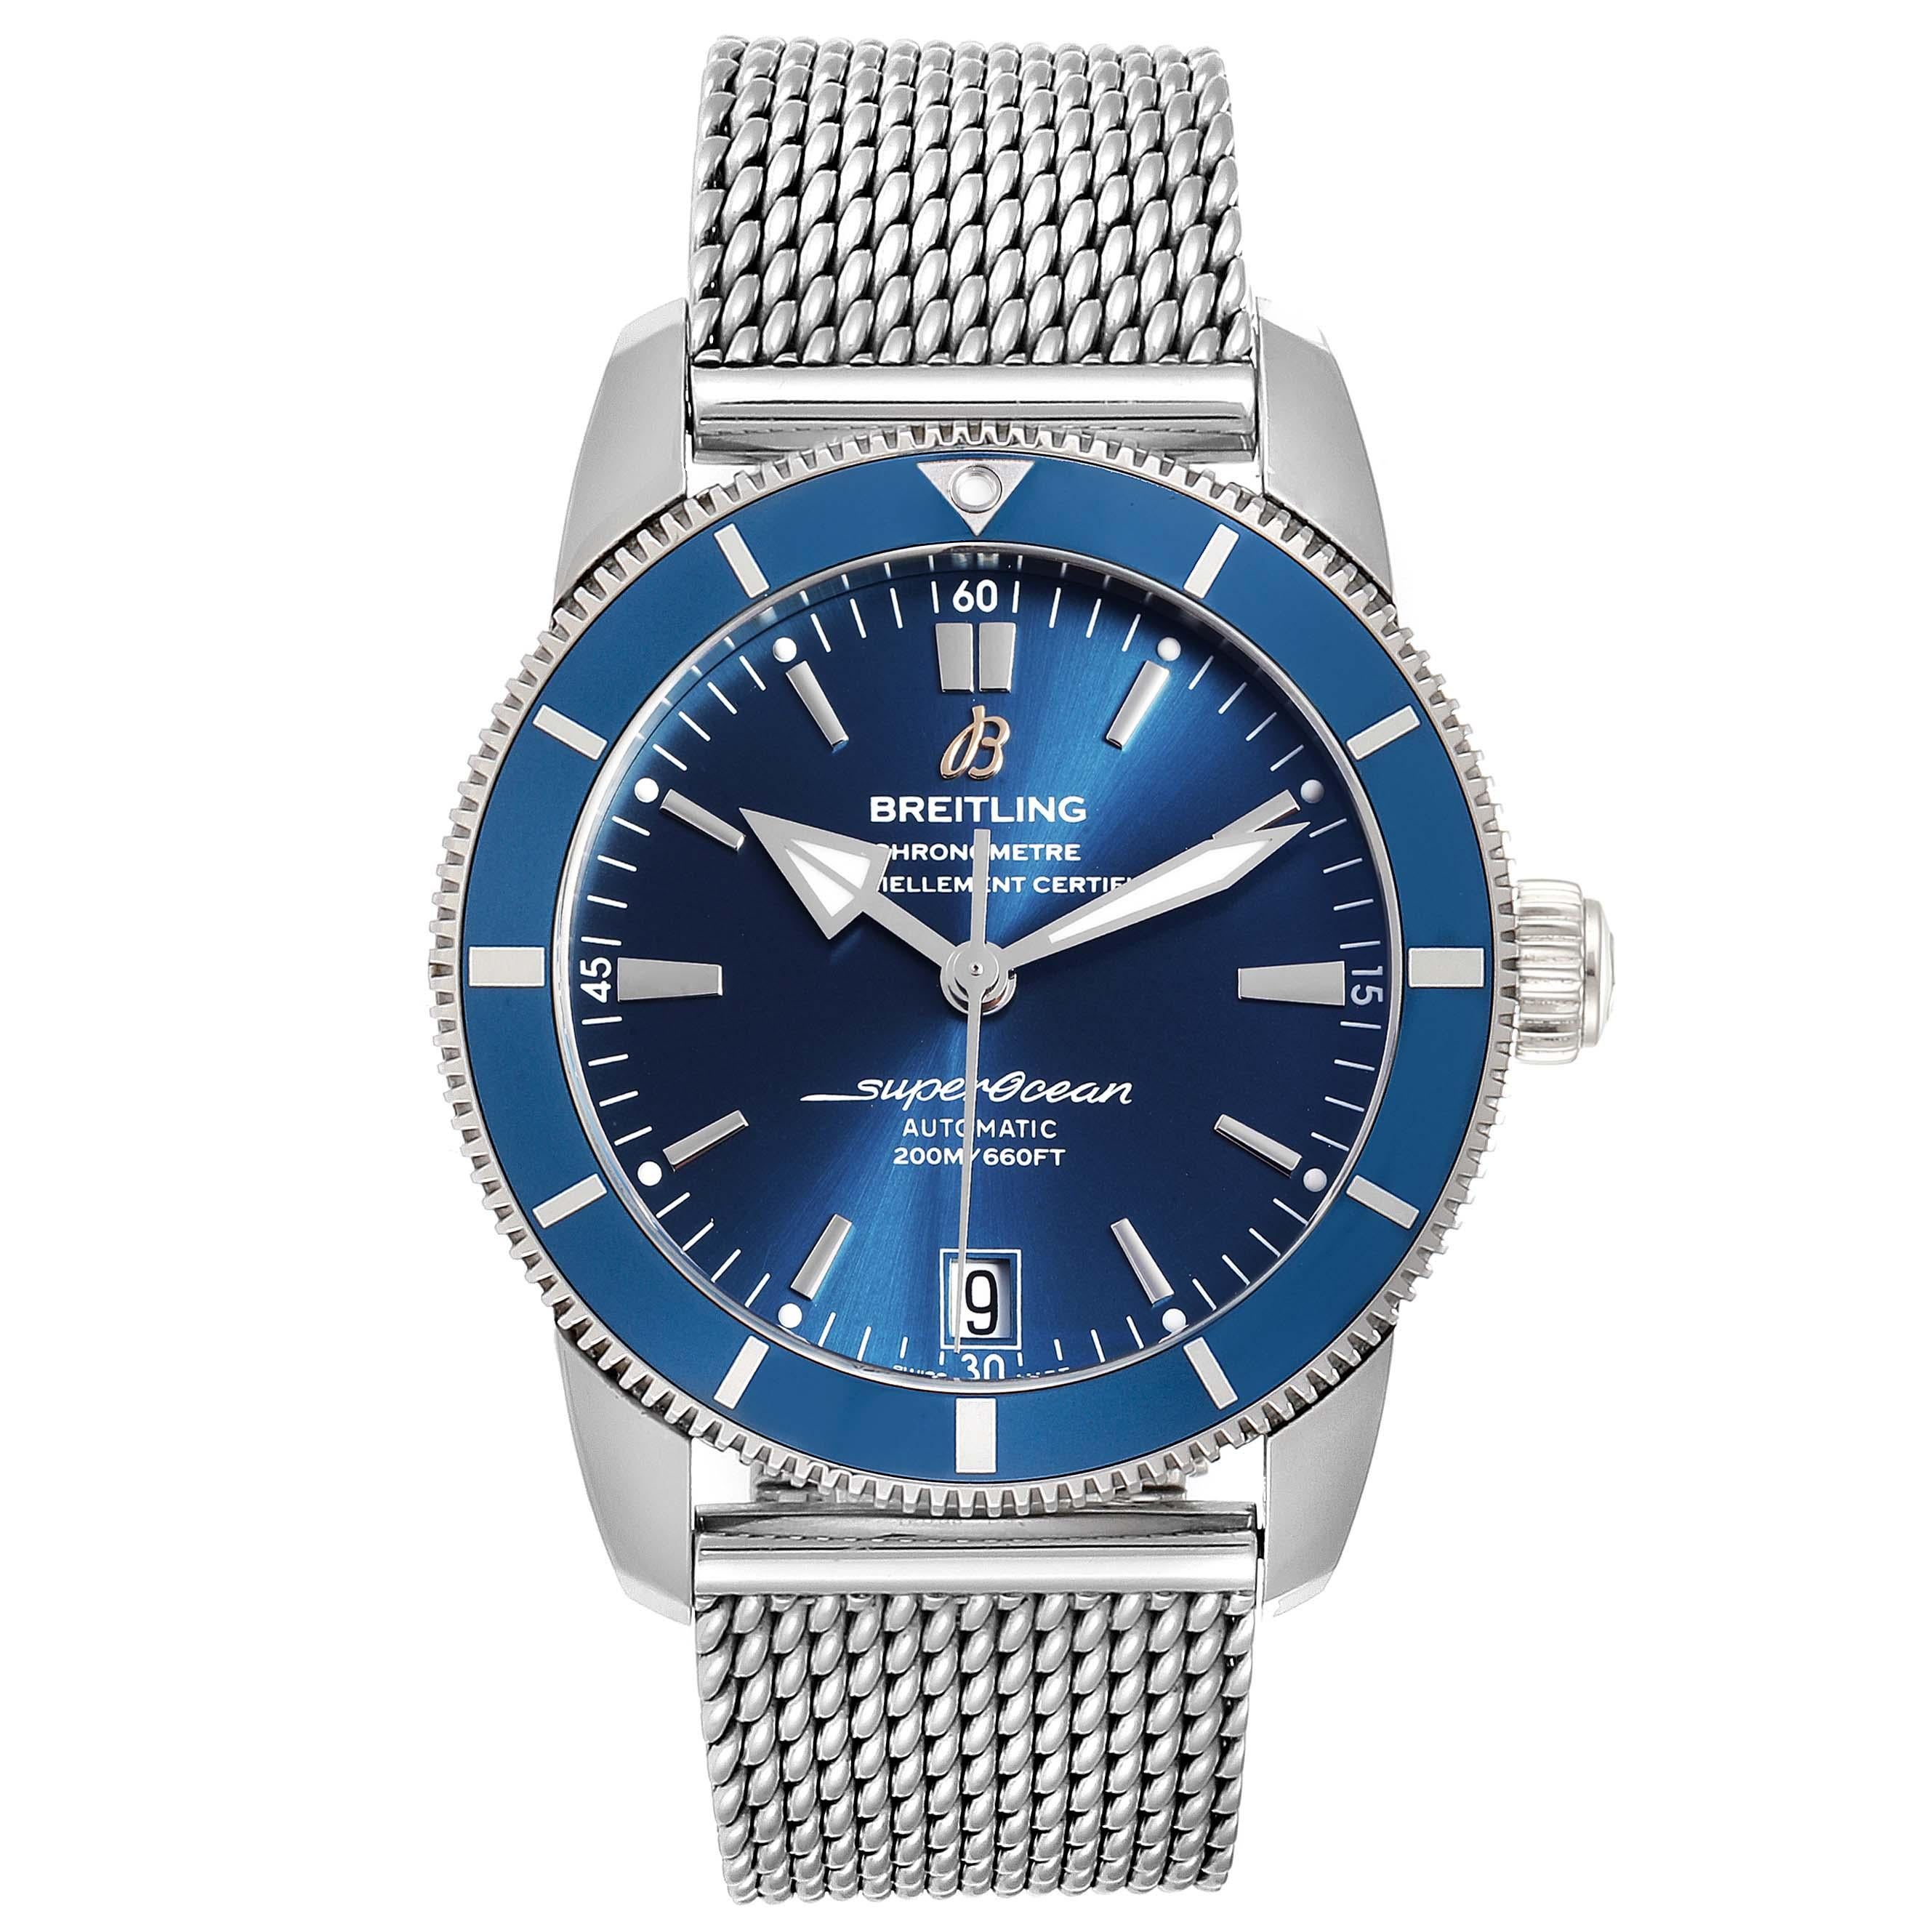 Breitling Superocean Heritage II 42 Steel Mens Watch AB2010 Box Papers. Automatic self-winding B20 movement. Stainless steel case 42.0 mm in diameter. Stainless steel screwed-down crown. Blue ceramic unidirectional revolving bezel. Scratch resistant